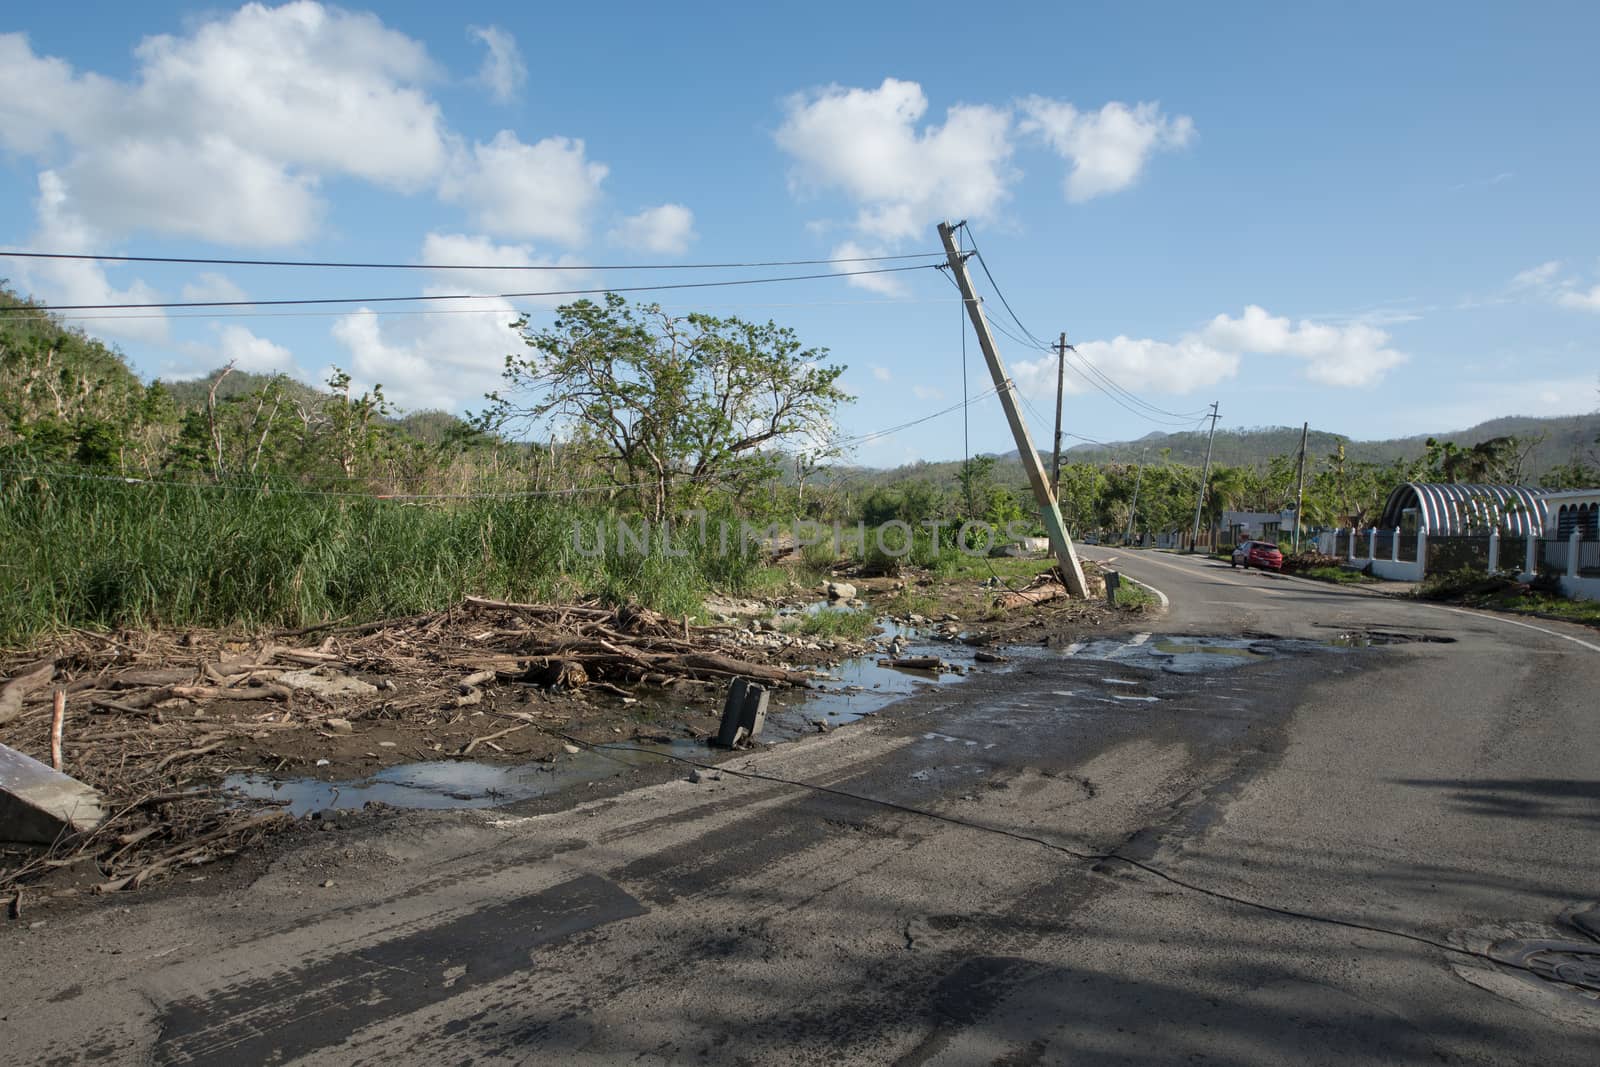 Hurricane Maria Damage in Puerto Rico by cestes001